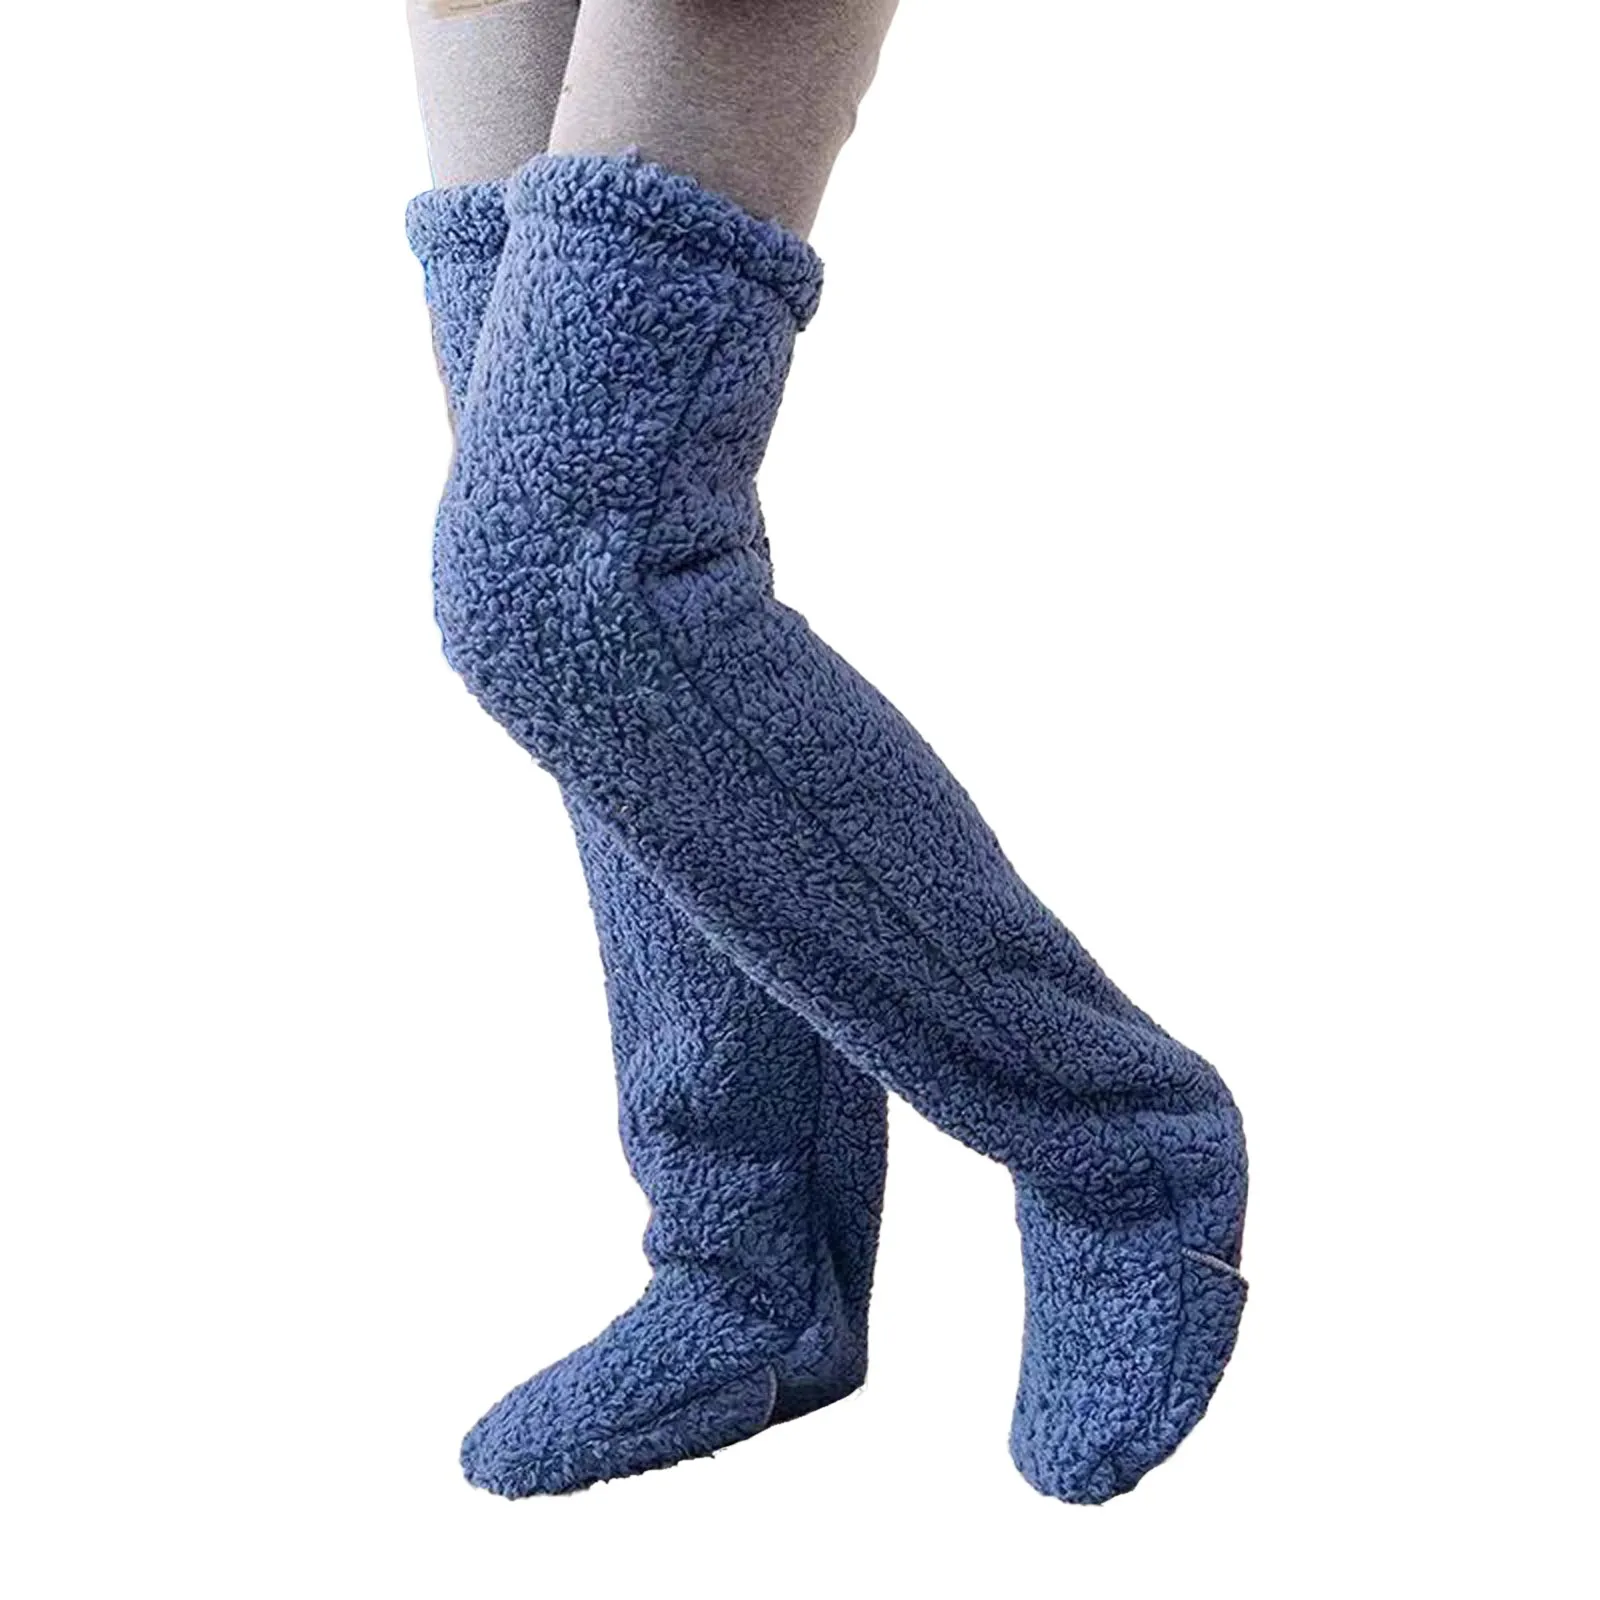 Fluffy Leg Warmers Stocking Winter Warm Leg Cover Home Over Knee